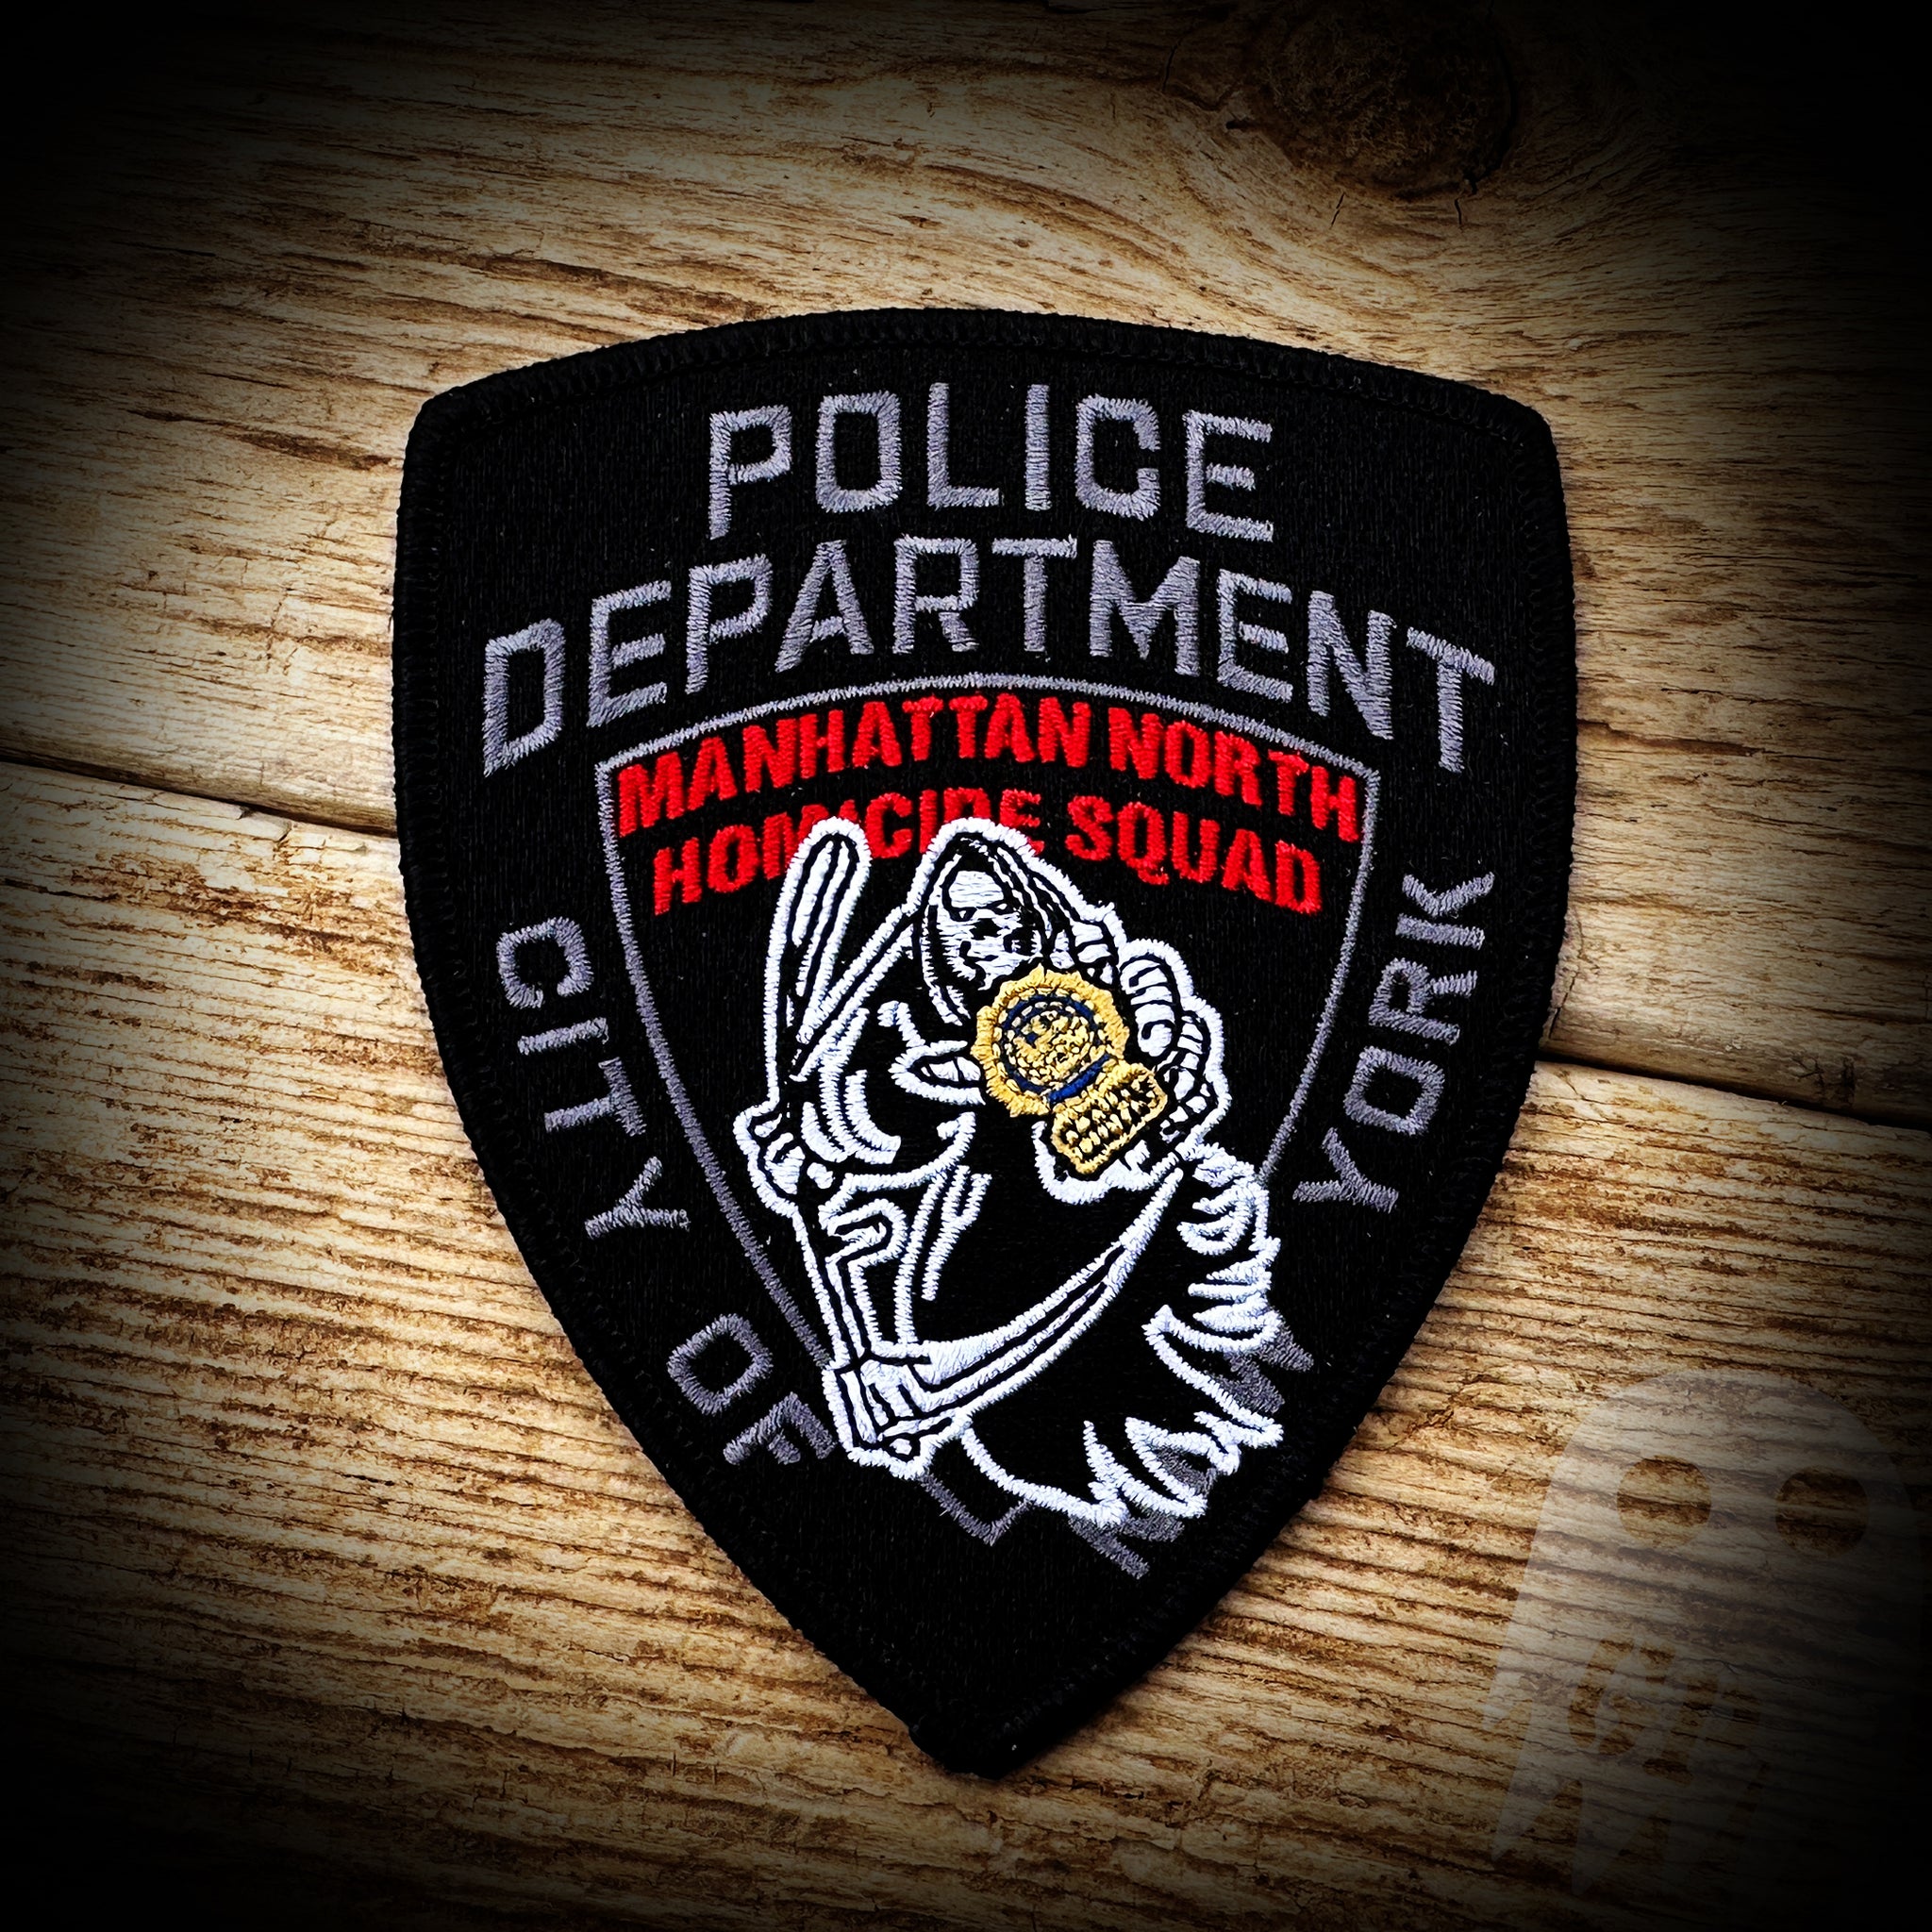 Manhattan Homicide - New York City, NY Police Department Manhattan North Homicide Squad Patch - Authentic